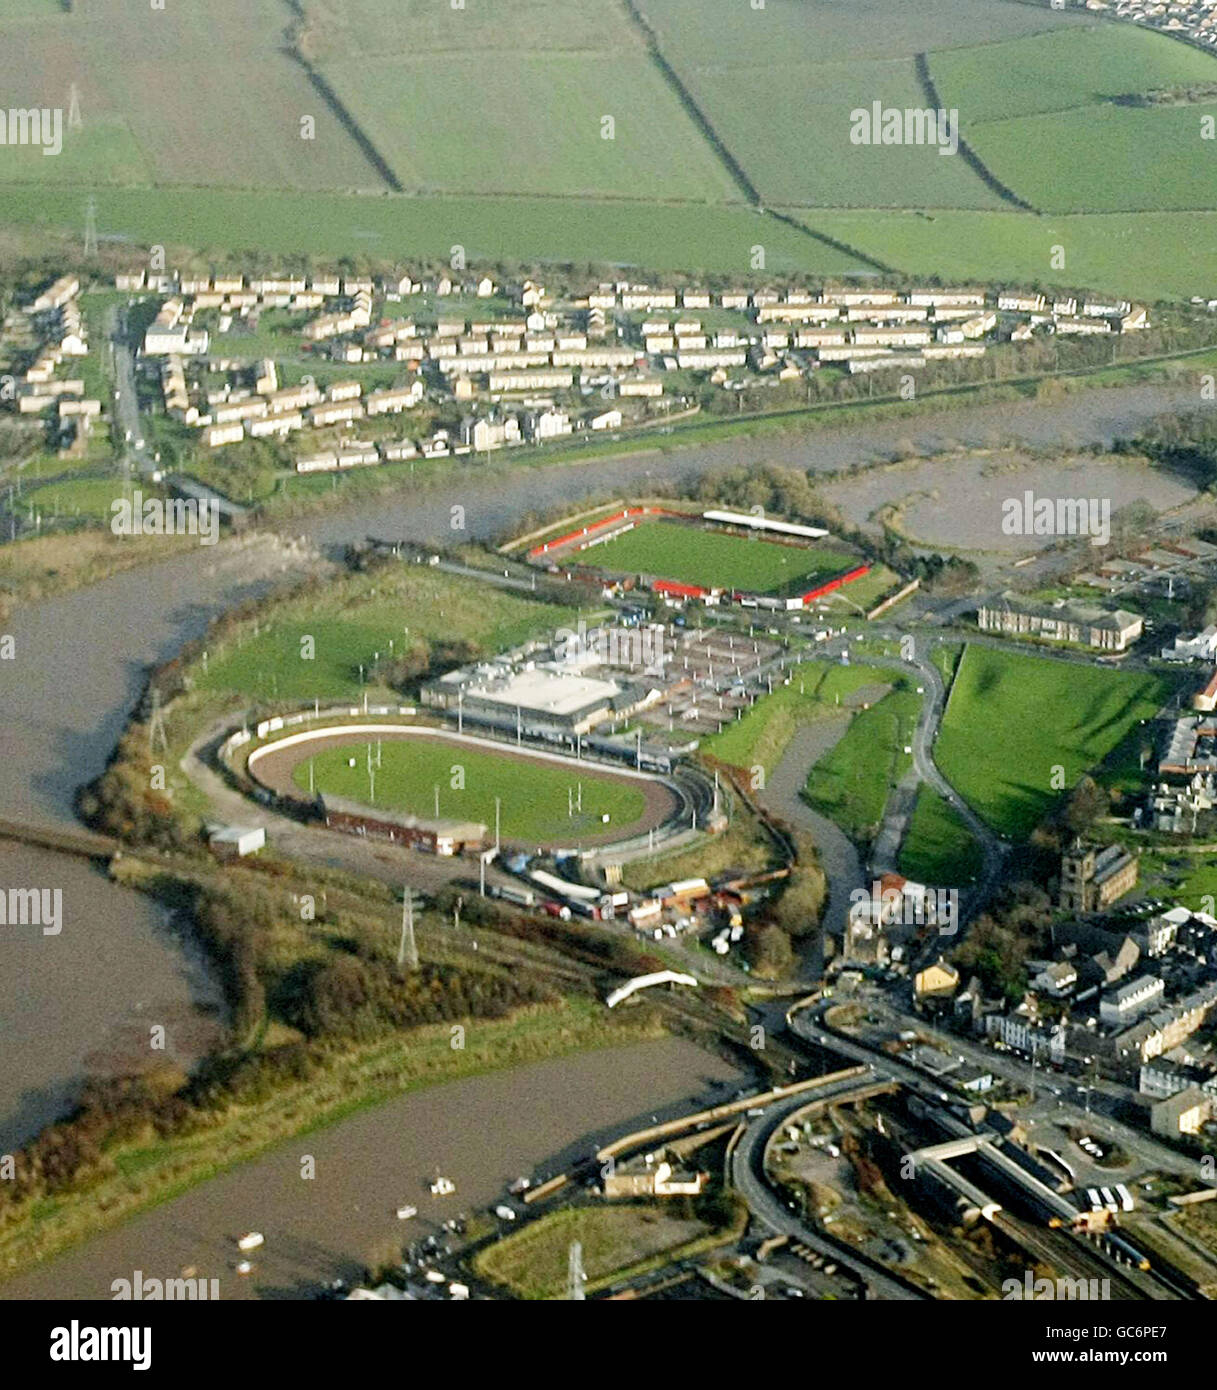 An aerial view of the Workington area showing the destroyed Northside bridge as floods submerged large parts of Cumbria. Stock Photo